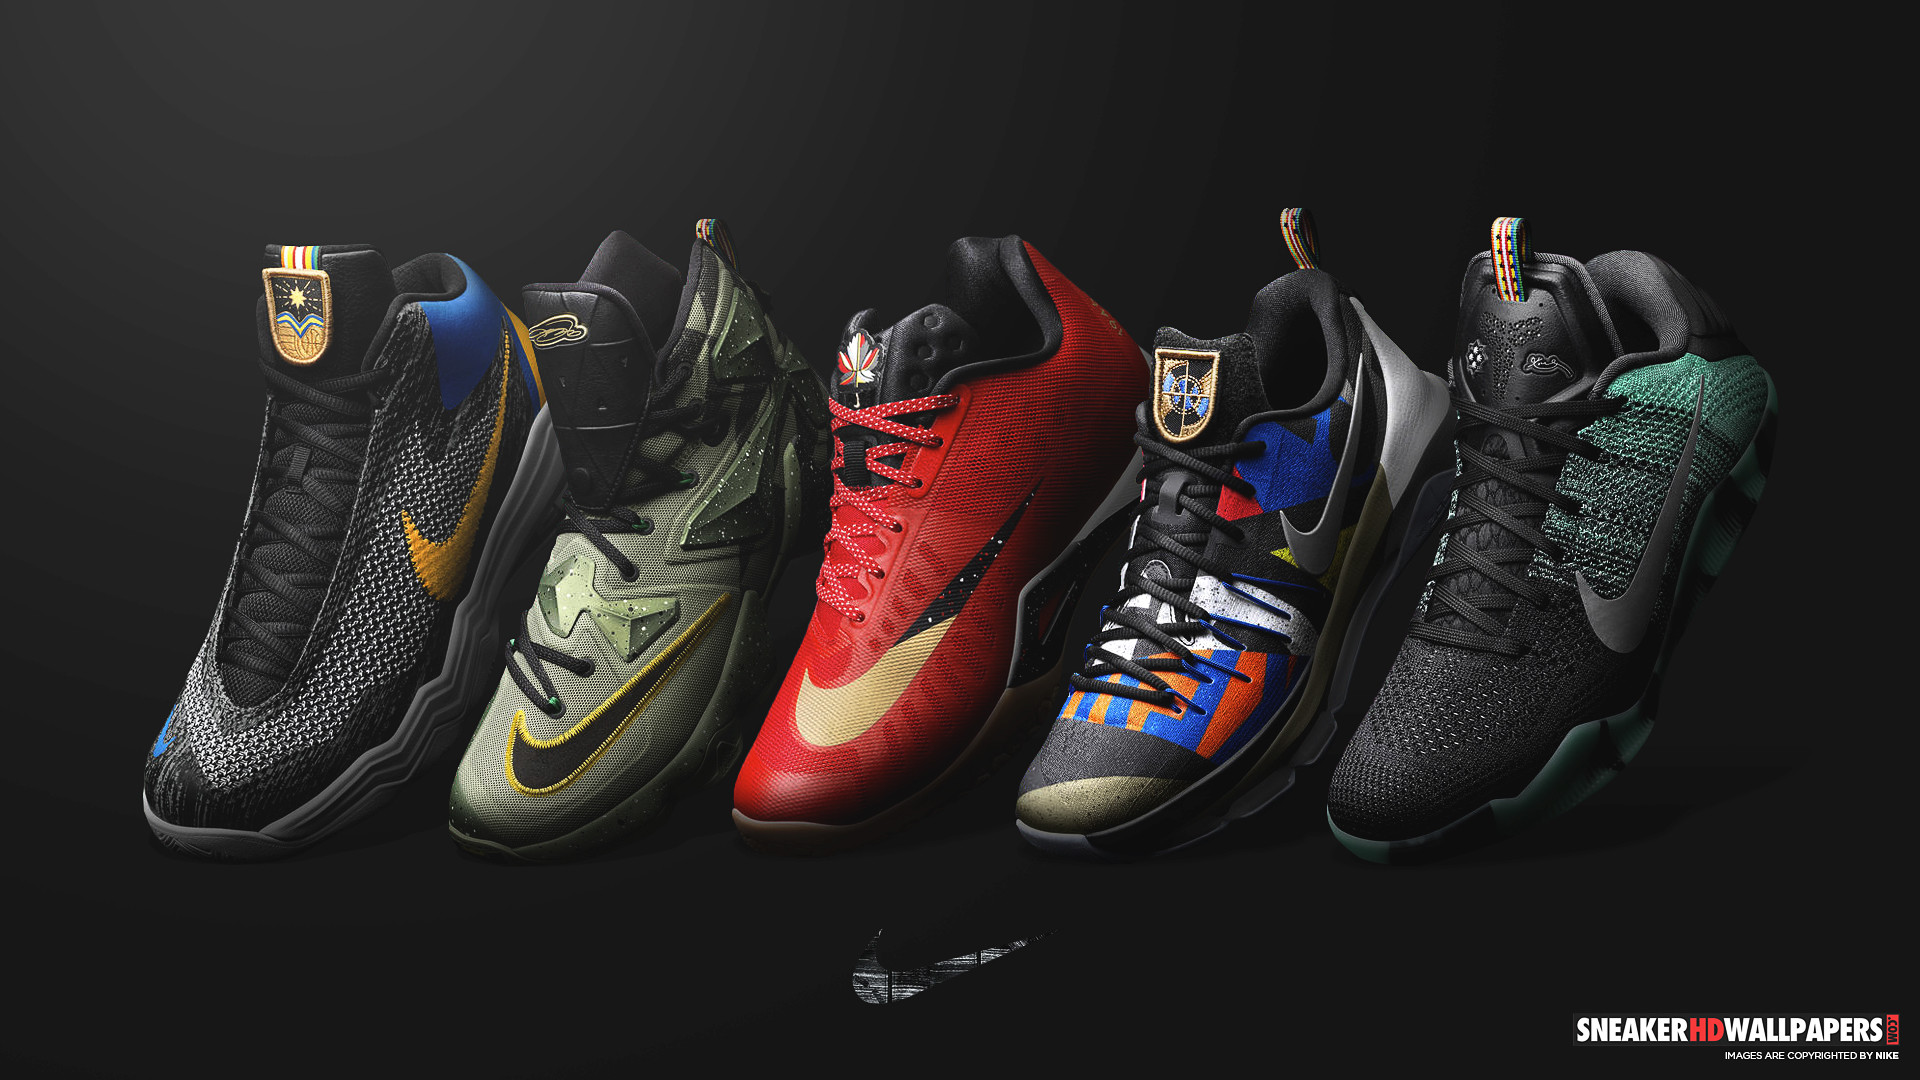 1920x1080 ... Nike Basketball Wallpapers - Wallpapers Browse ...